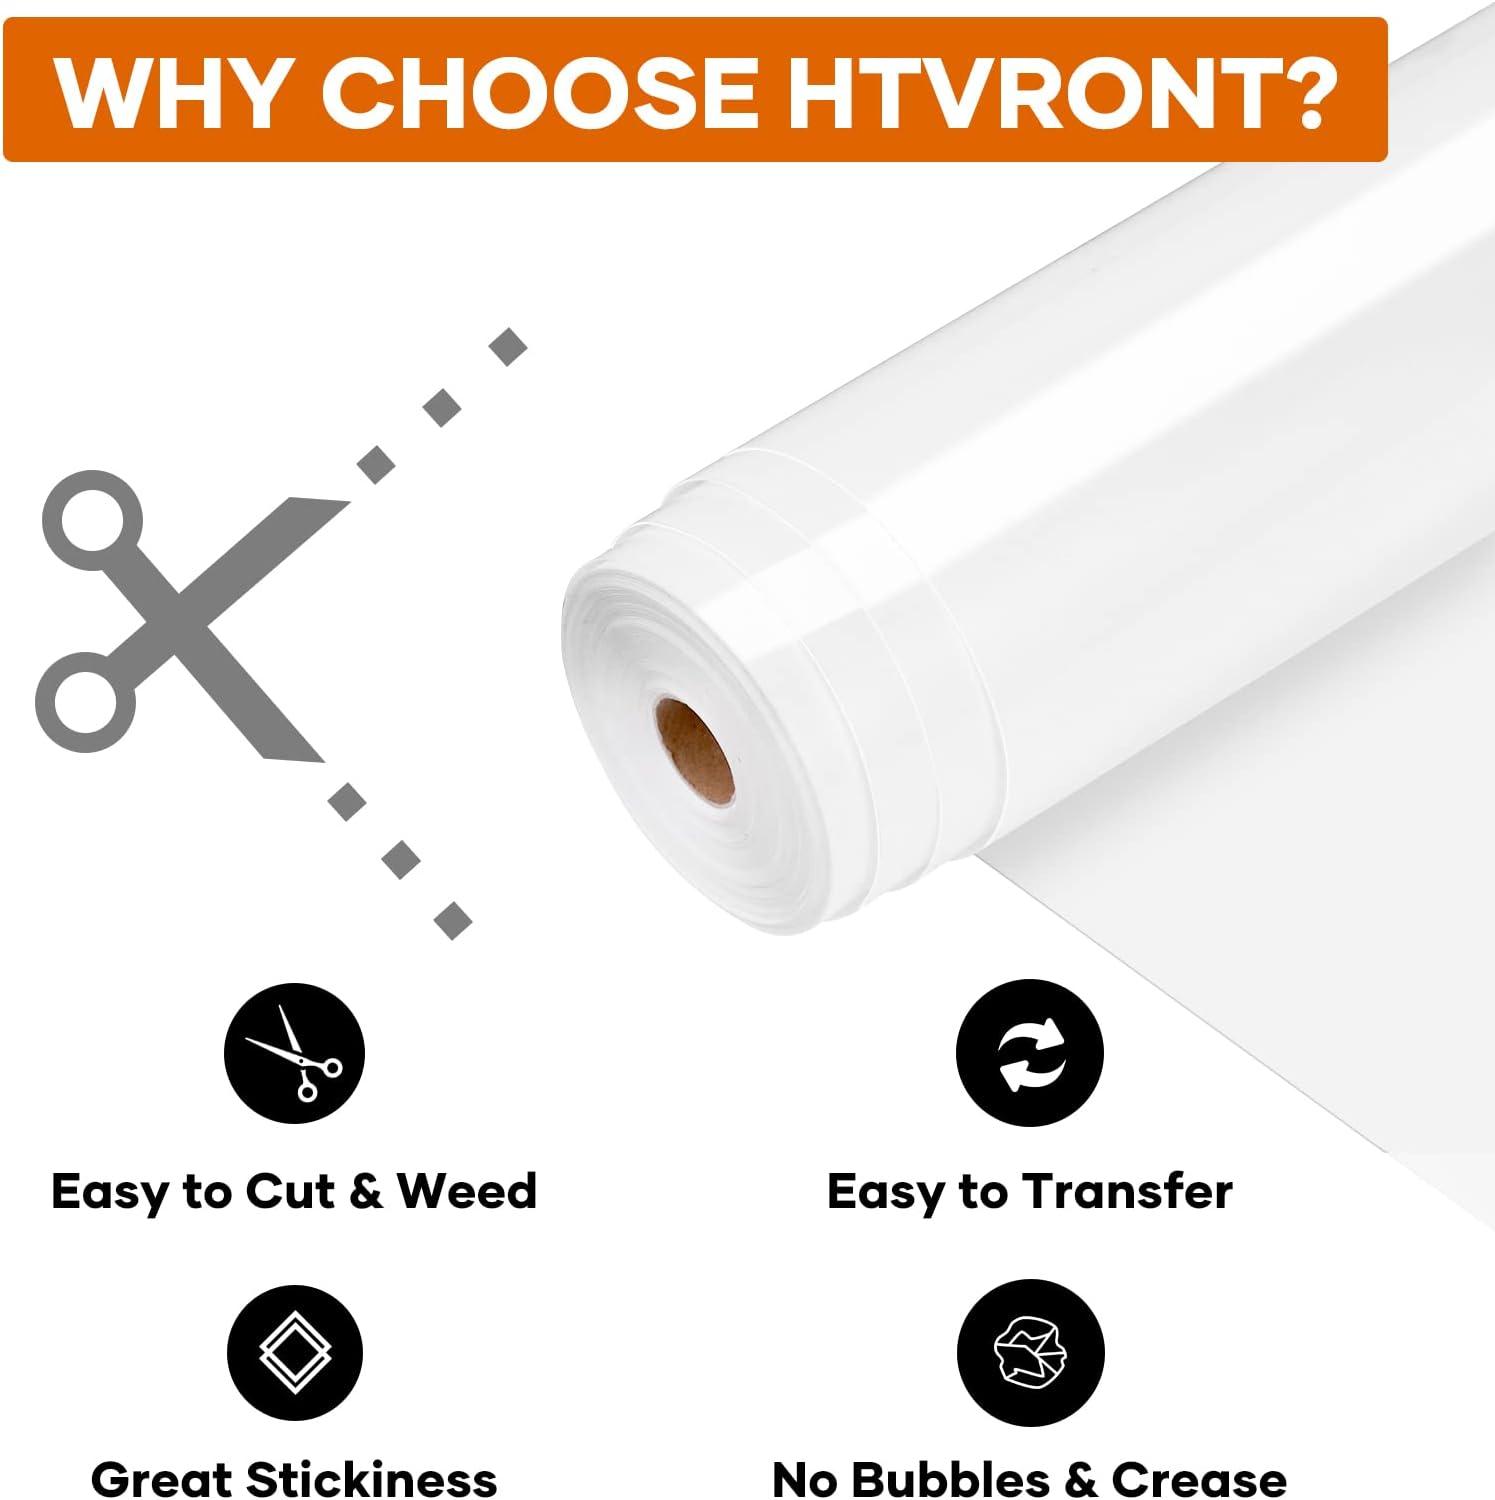 HTVRONT HTV Vinyl Rolls Heat Transfer Vinyl - 12 x 15ft Silver HTV Vinyl  for Shirts, Iron on Vinyl for All Cutter Machine - Easy to Cut & Weed for